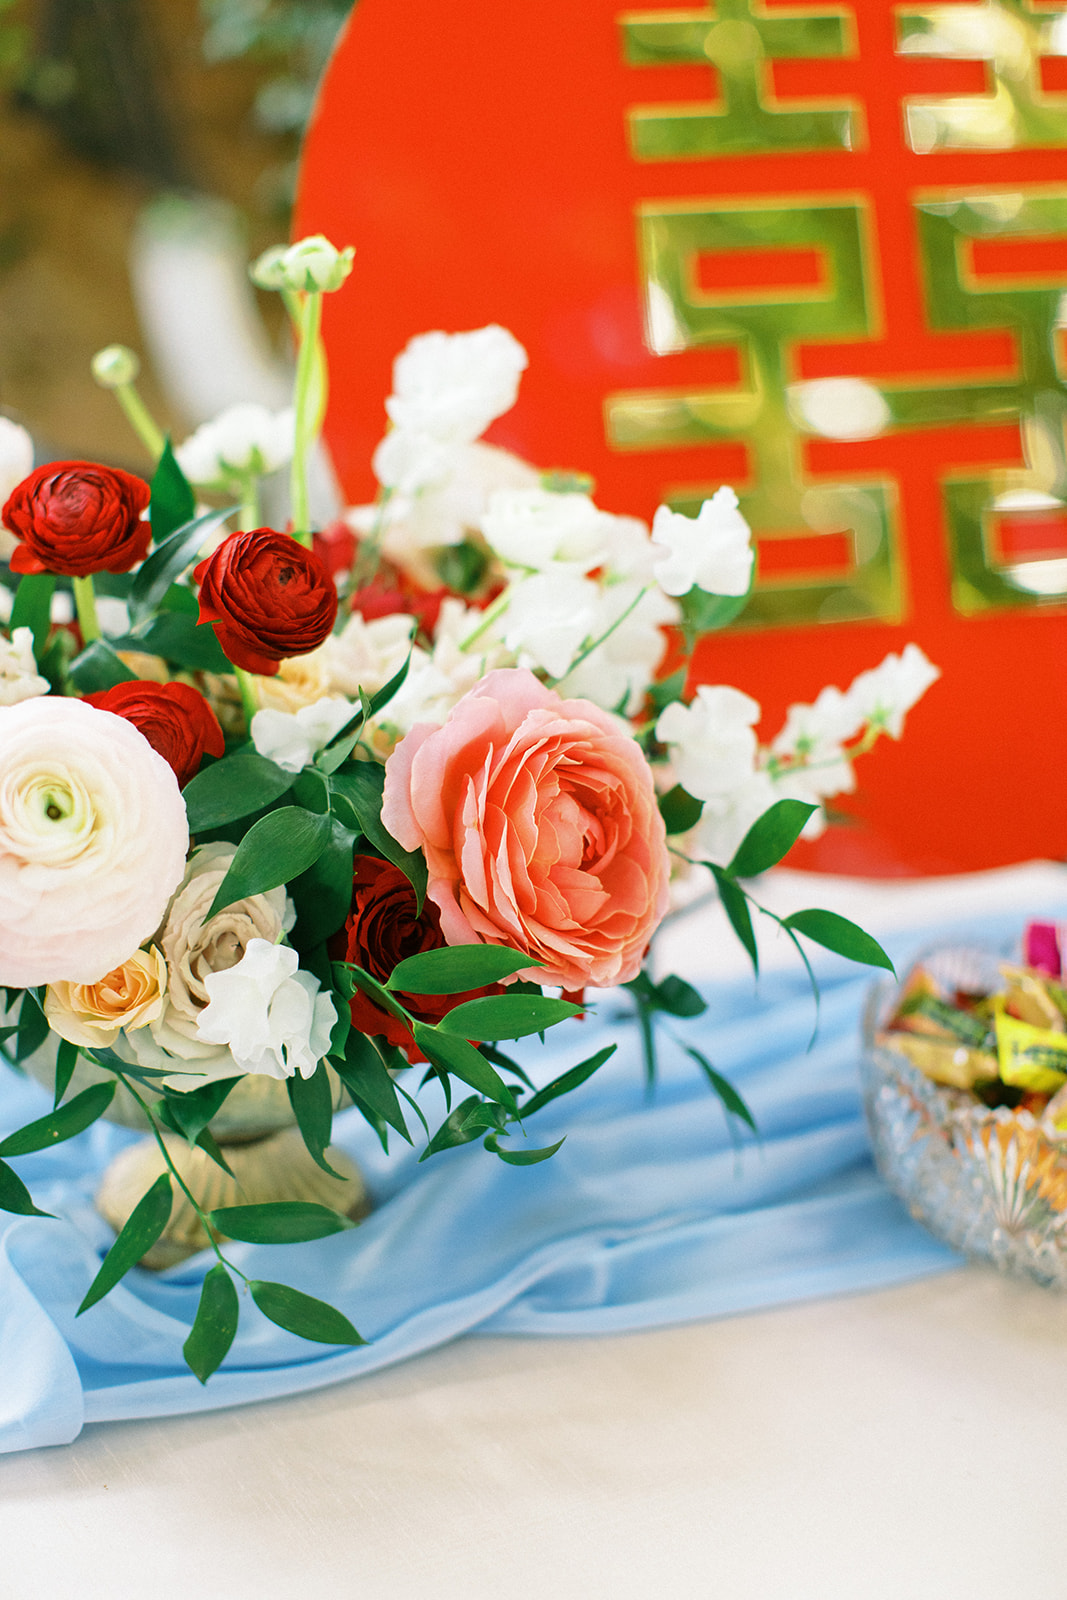 Reception centerpiece of white, pink, and red flowers with greenery in gold vase.